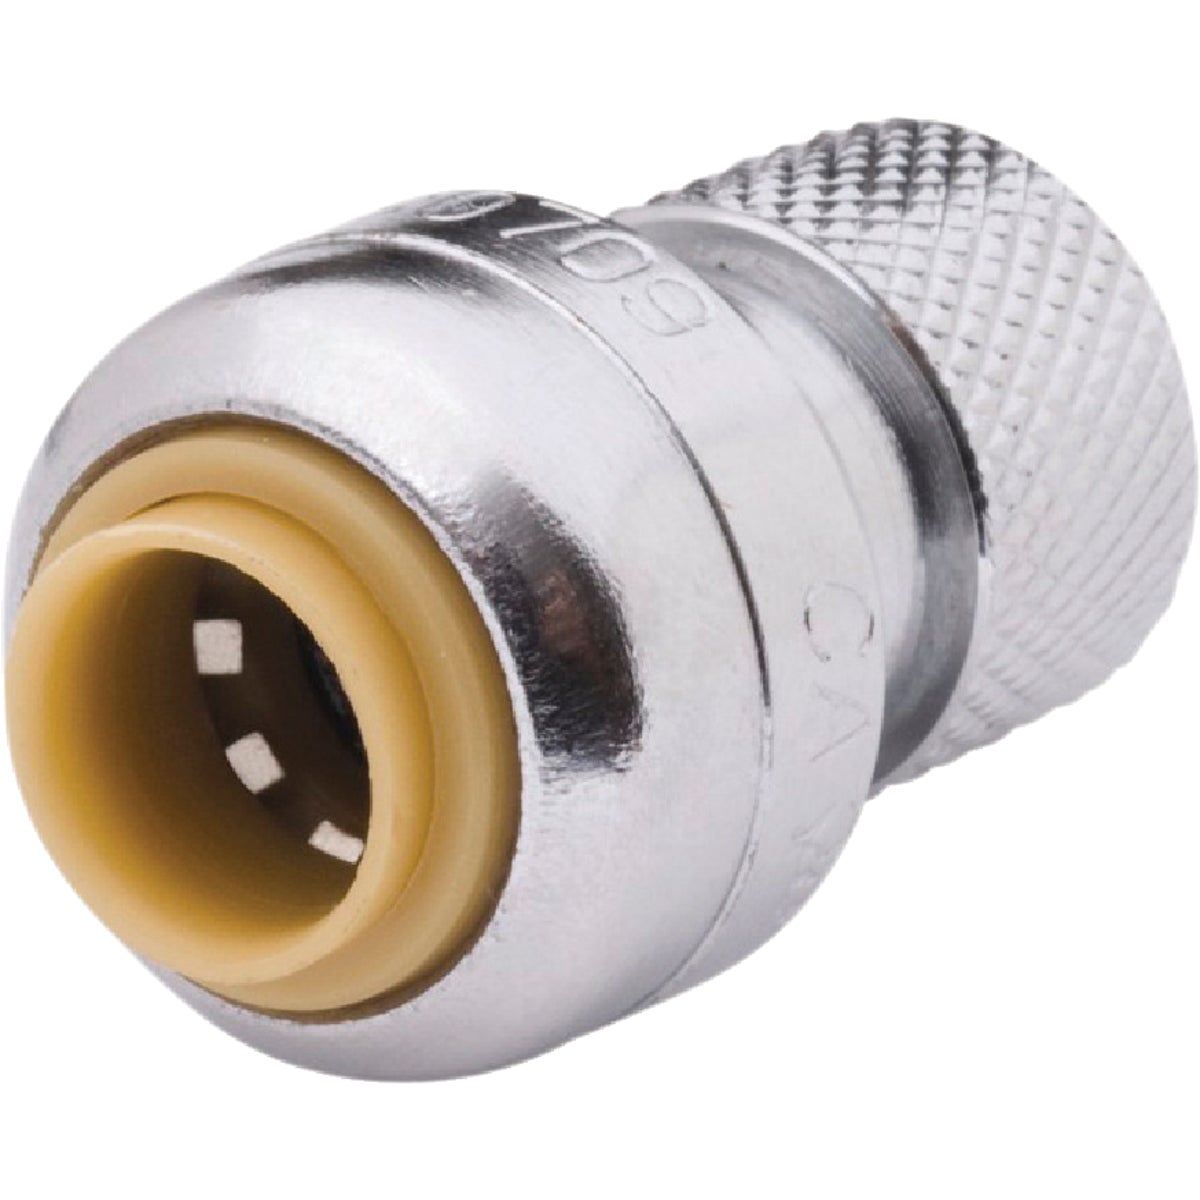 SharkBite 1/4 In. x 3/8 In. Push-to-Connect Brass Stop Valve Adapter